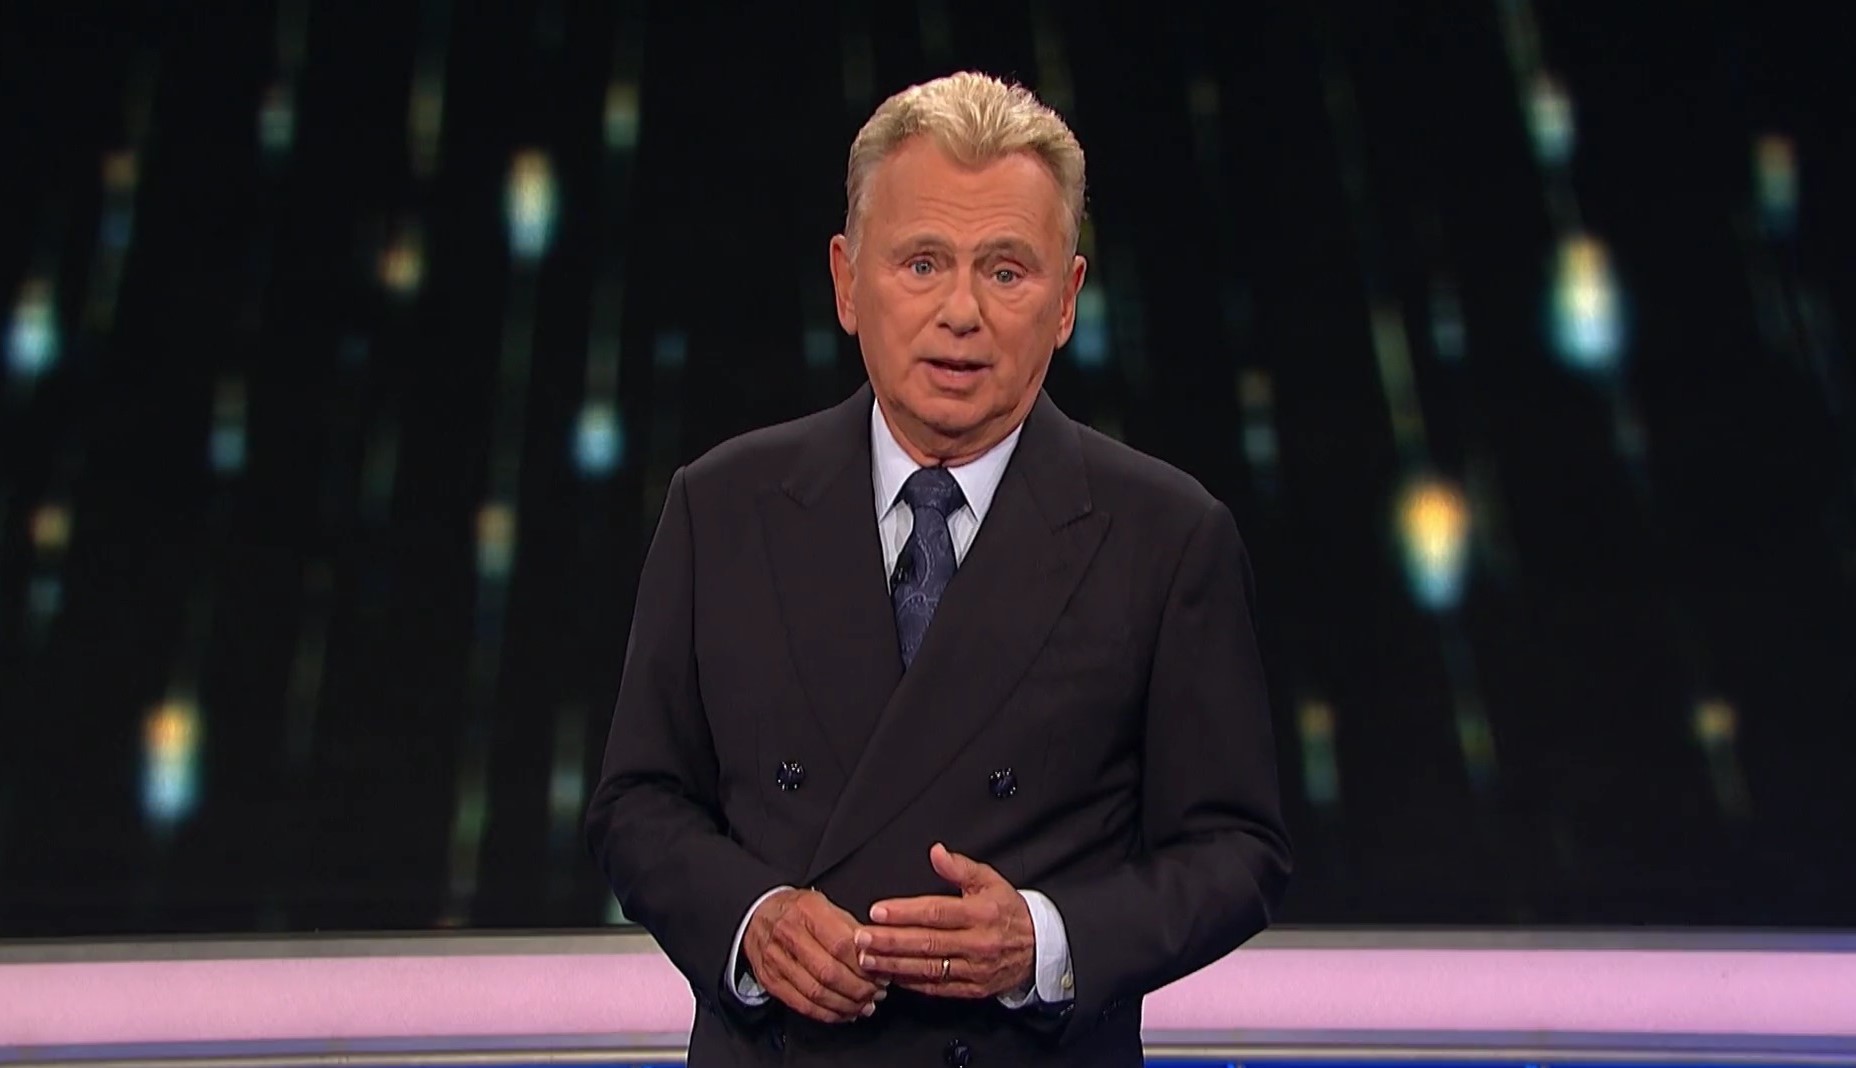 TV’s longest-serving game show host Pat Sajak signs off from Wheel of Fortune